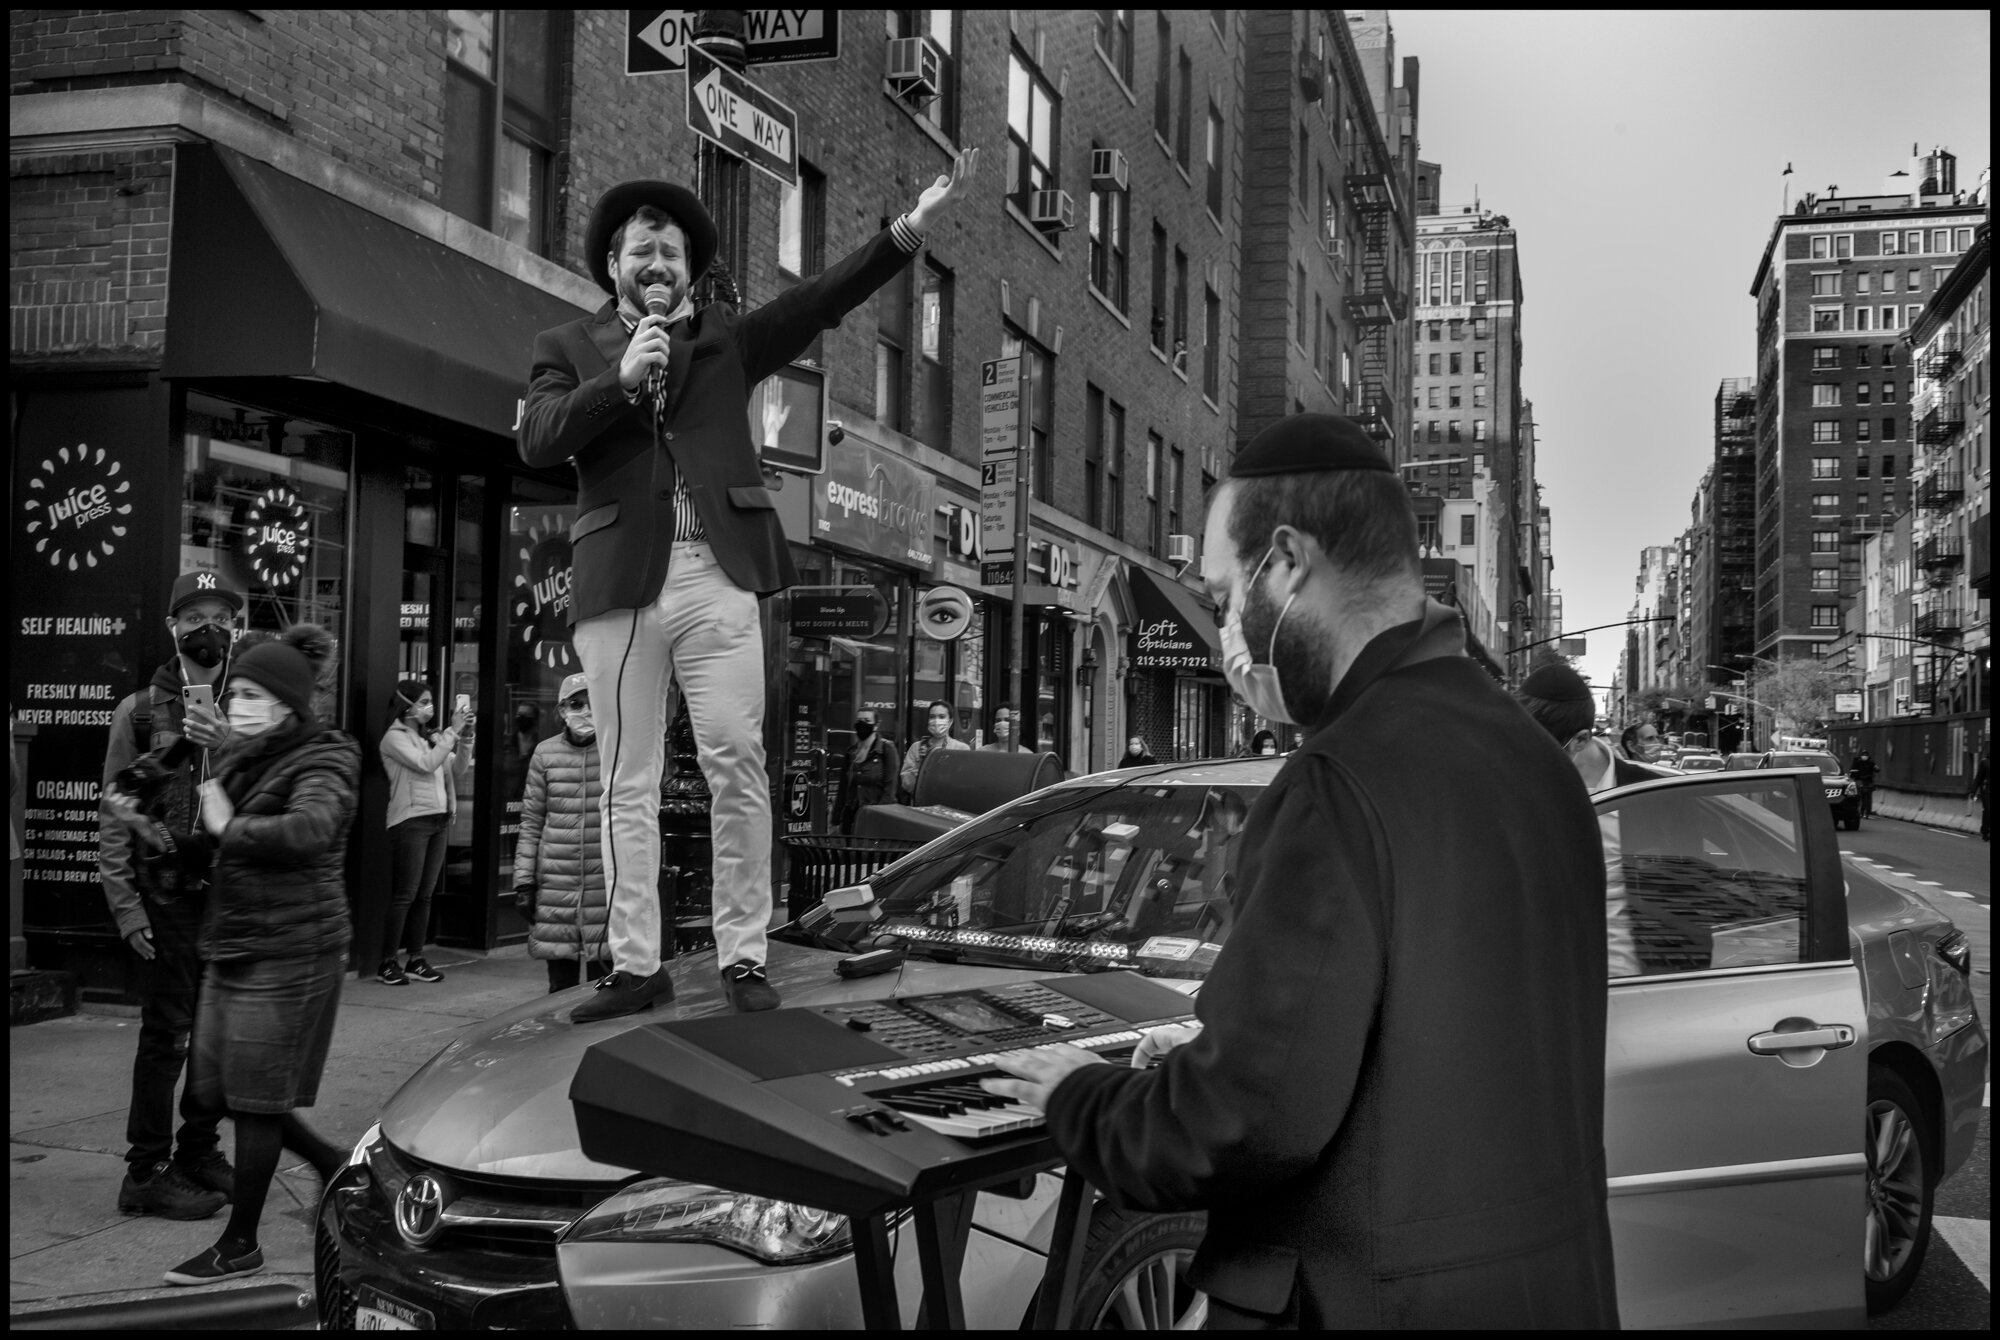  Young man sings from atop a car, “America the Beautiful”, at 7pm on Mother’s Day.  May 10, 2020. © Peter Turnley.   ID# 42-002 